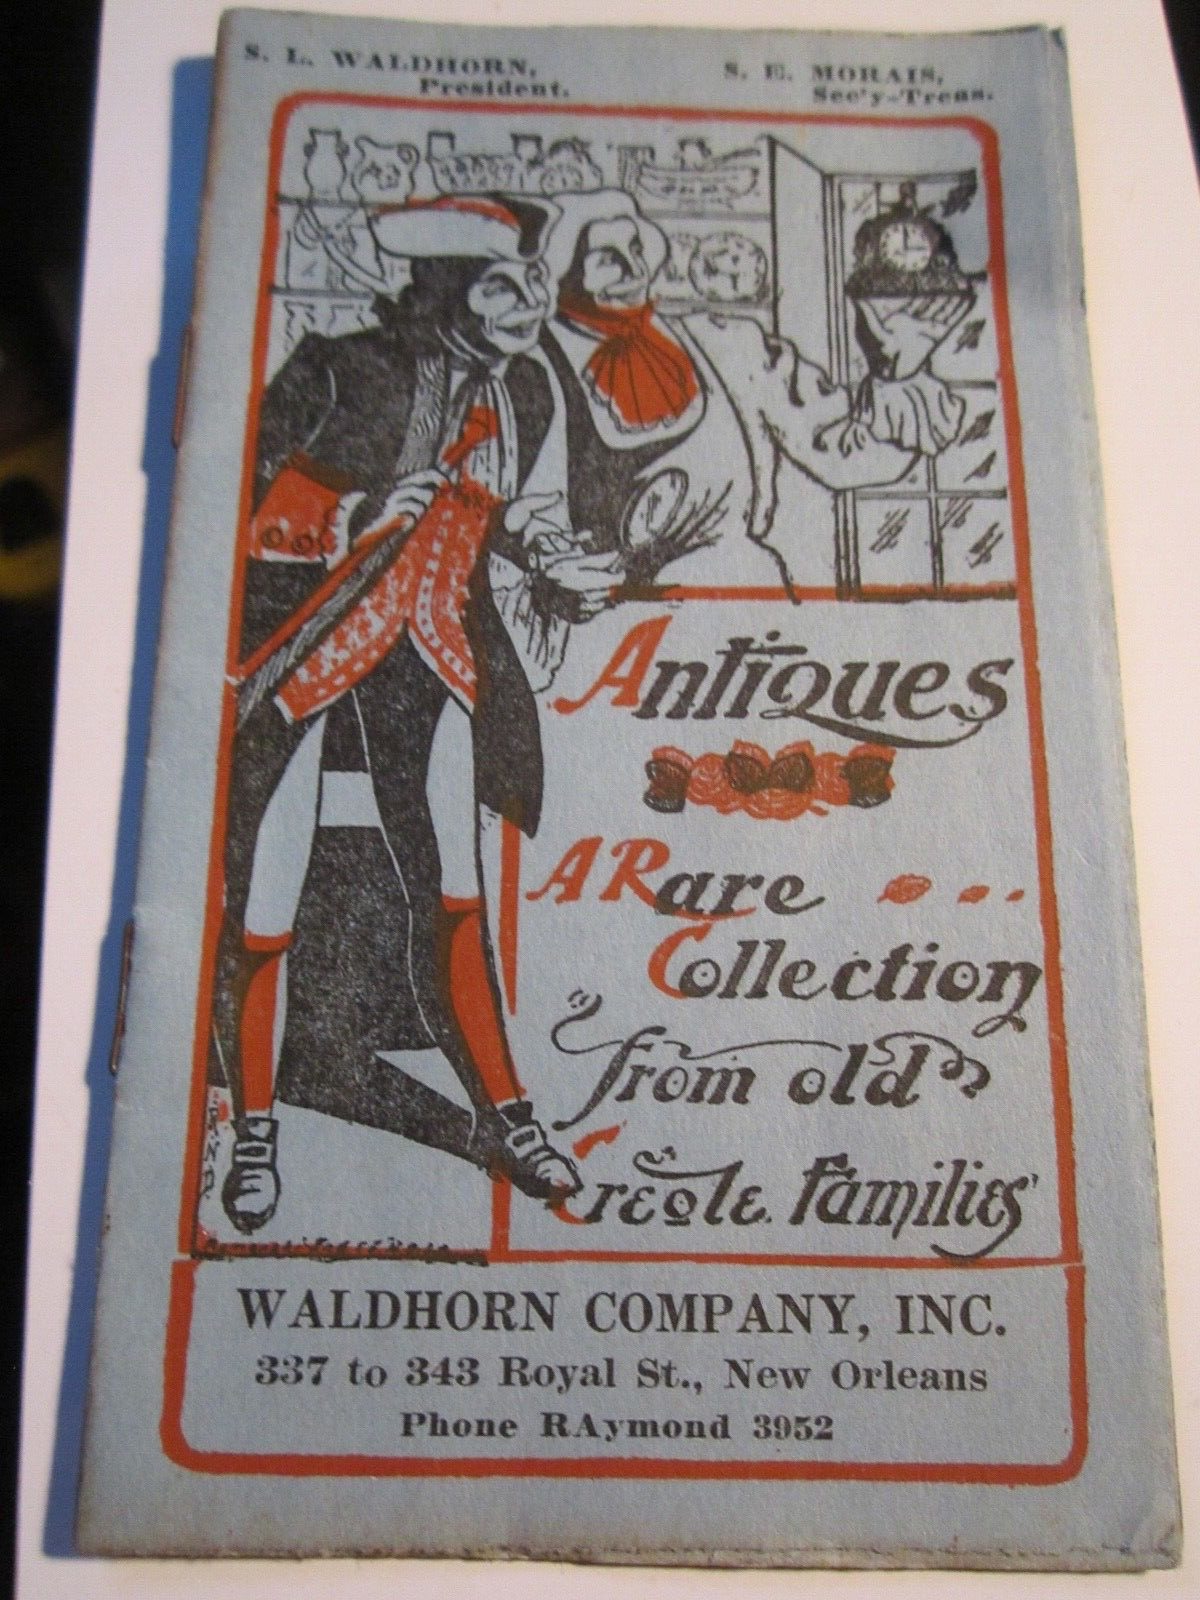 1894 ANTIQUE STORE ADVERTISEMENT BOOKLET IN NEW ORLEANS - BBA-45